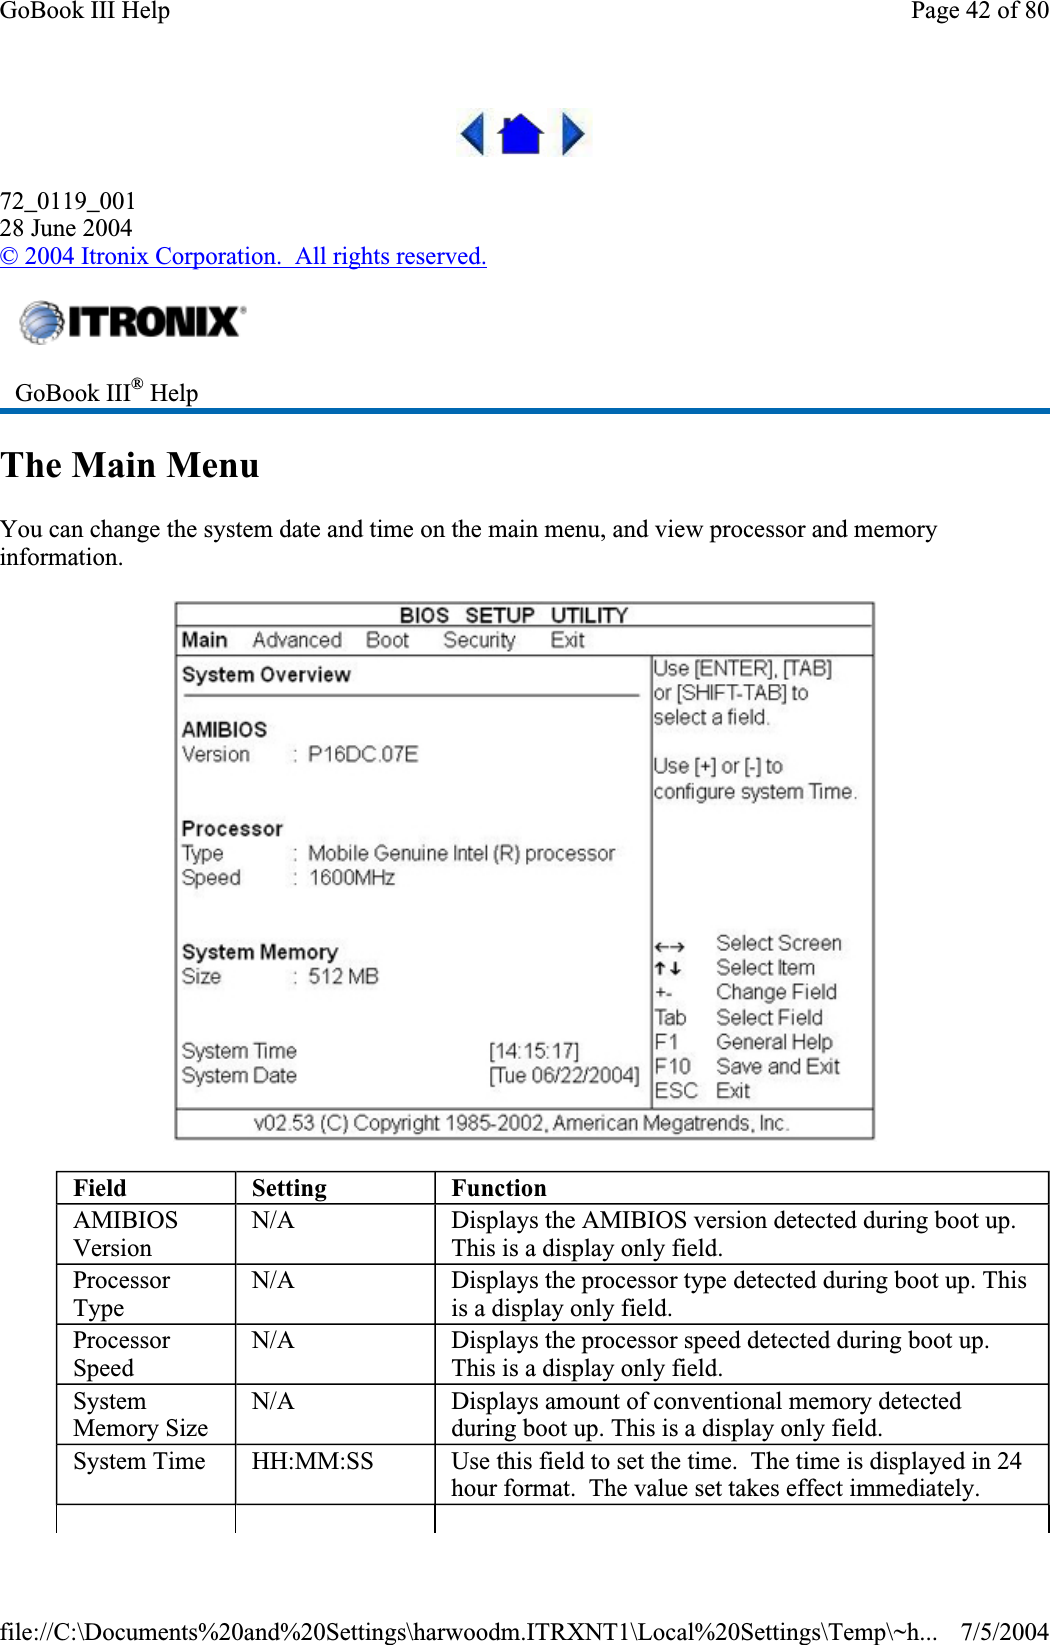 72_0119_00128 June 2004©2004 Itronix Corporation.  All rights reserved.The Main Menu You can change the system date and time on the main menu, and view processor and memory information.GoBook III® HelpField Setting FunctionAMIBIOS VersionN/A Displays the AMIBIOS version detected during boot up. This is a display only field. ProcessorTypeN/A Displays the processor type detected during boot up. This is a display only field. ProcessorSpeedN/A Displays the processor speed detected during boot up. This is a display only field. SystemMemory Size N/A Displays amount of conventional memory detected during boot up. This is a display only field. System Time  HH:MM:SS  Use this field to set the time.  The time is displayed in 24 hour format.  The value set takes effect immediately. Page 42 of 80GoBook III Help7/5/2004file://C:\Documents%20and%20Settings\harwoodm.ITRXNT1\Local%20Settings\Temp\~h...